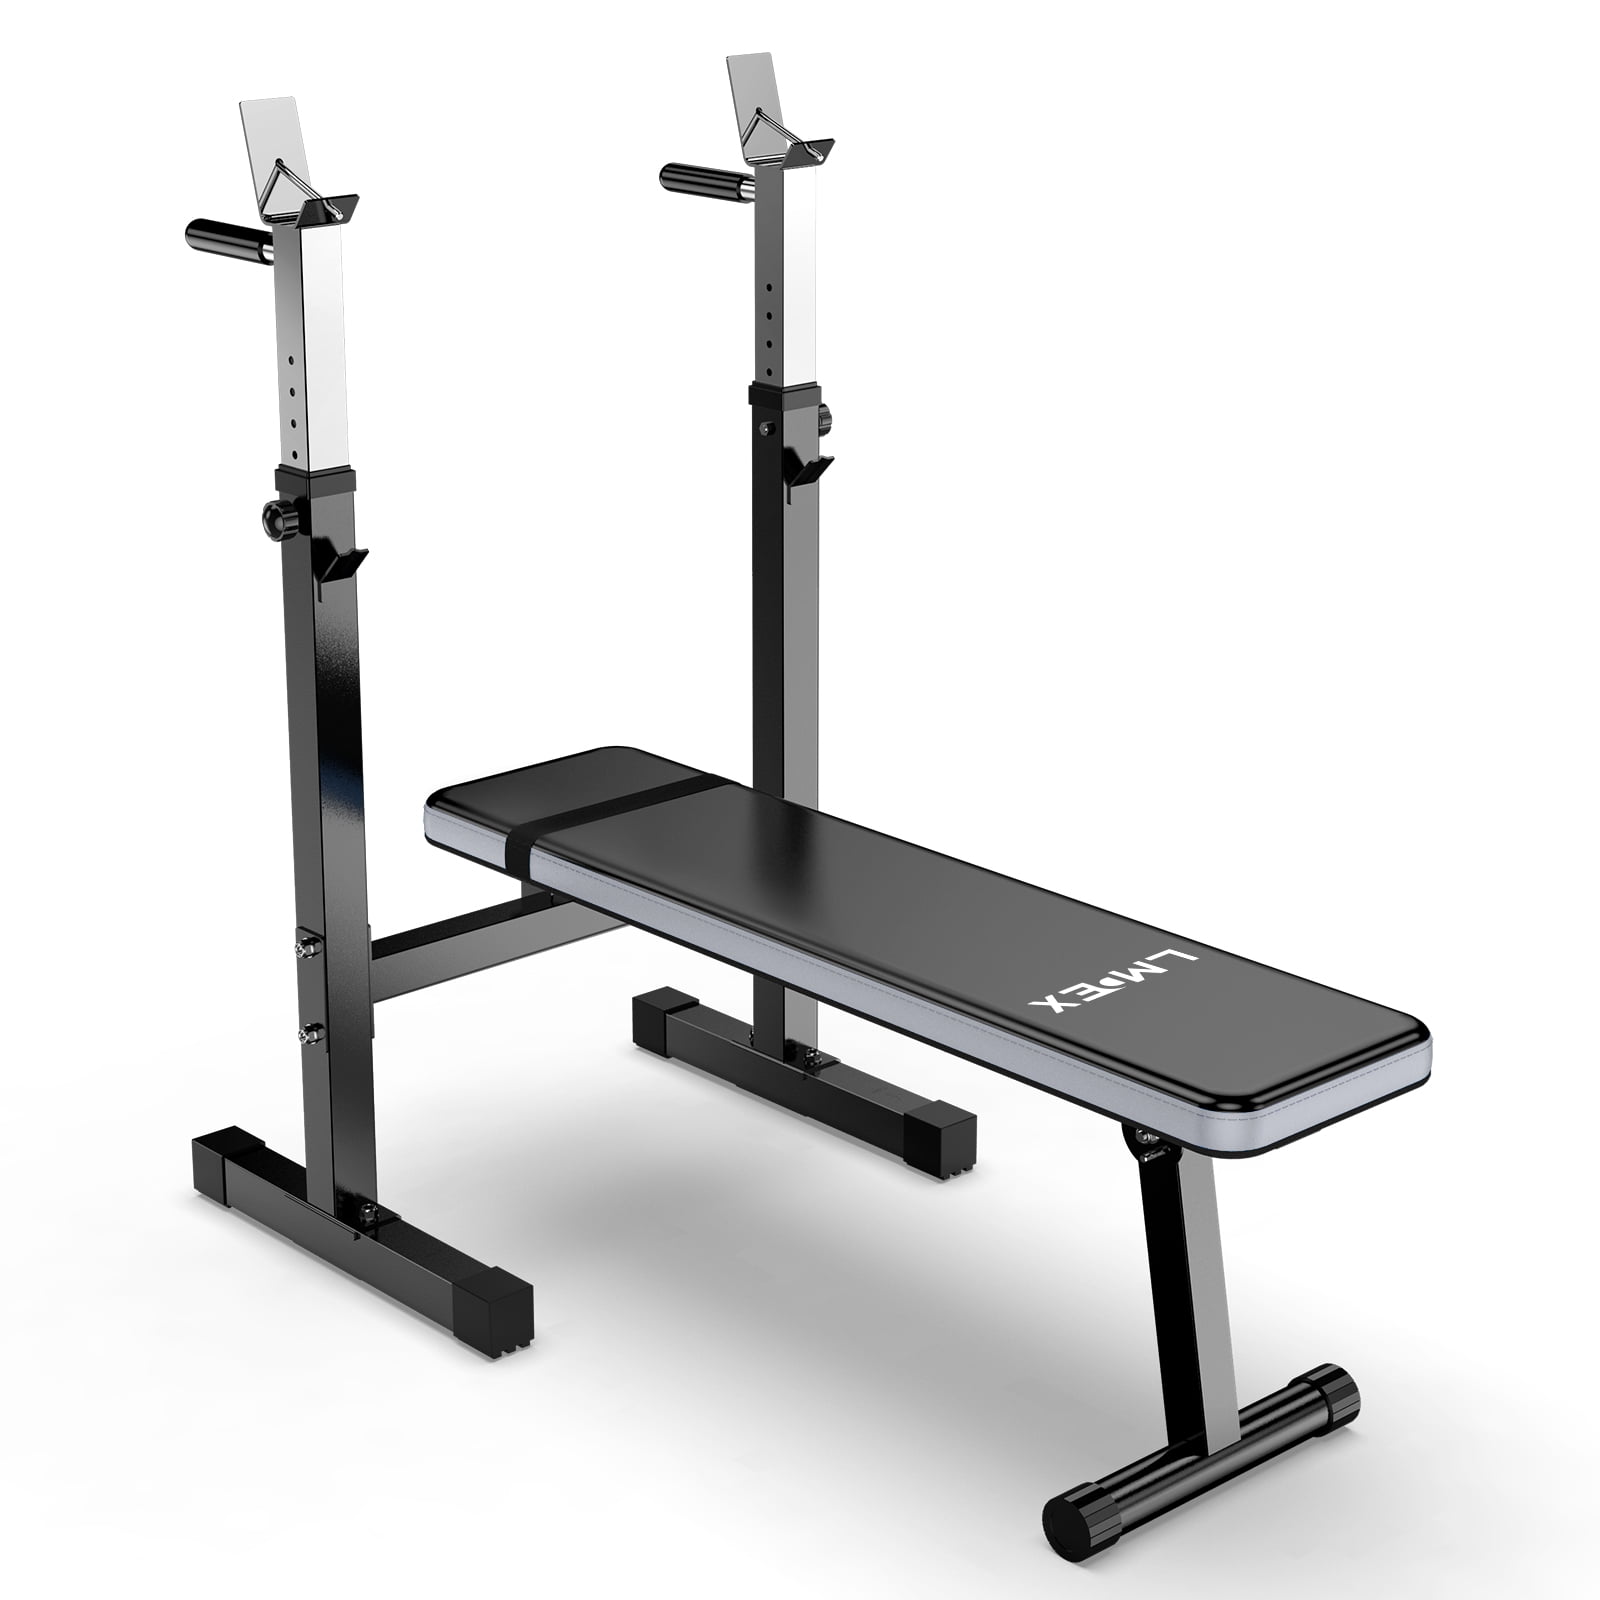 LMDEX Adjustable Weight Bench Barbell Folding & for Strength Workout Fitness Gym Rack Home Body Incline Decline Capability Full